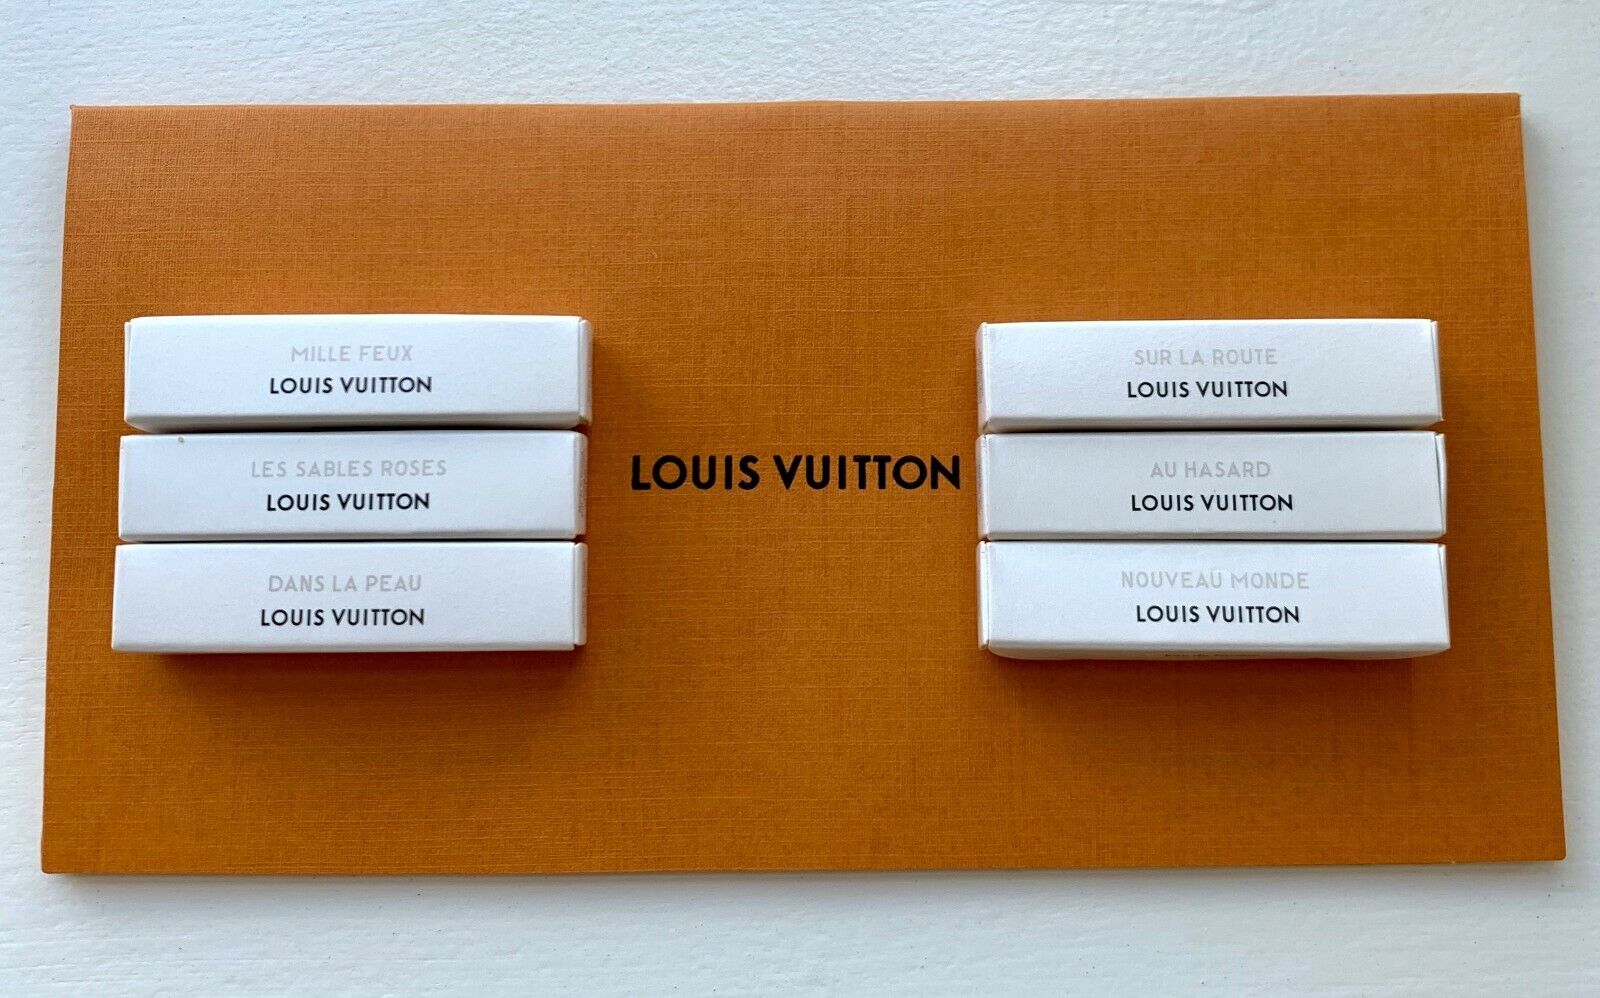 NEW Authentic Louis Vuitton Assorted EDP Fragrance Samples 2mL